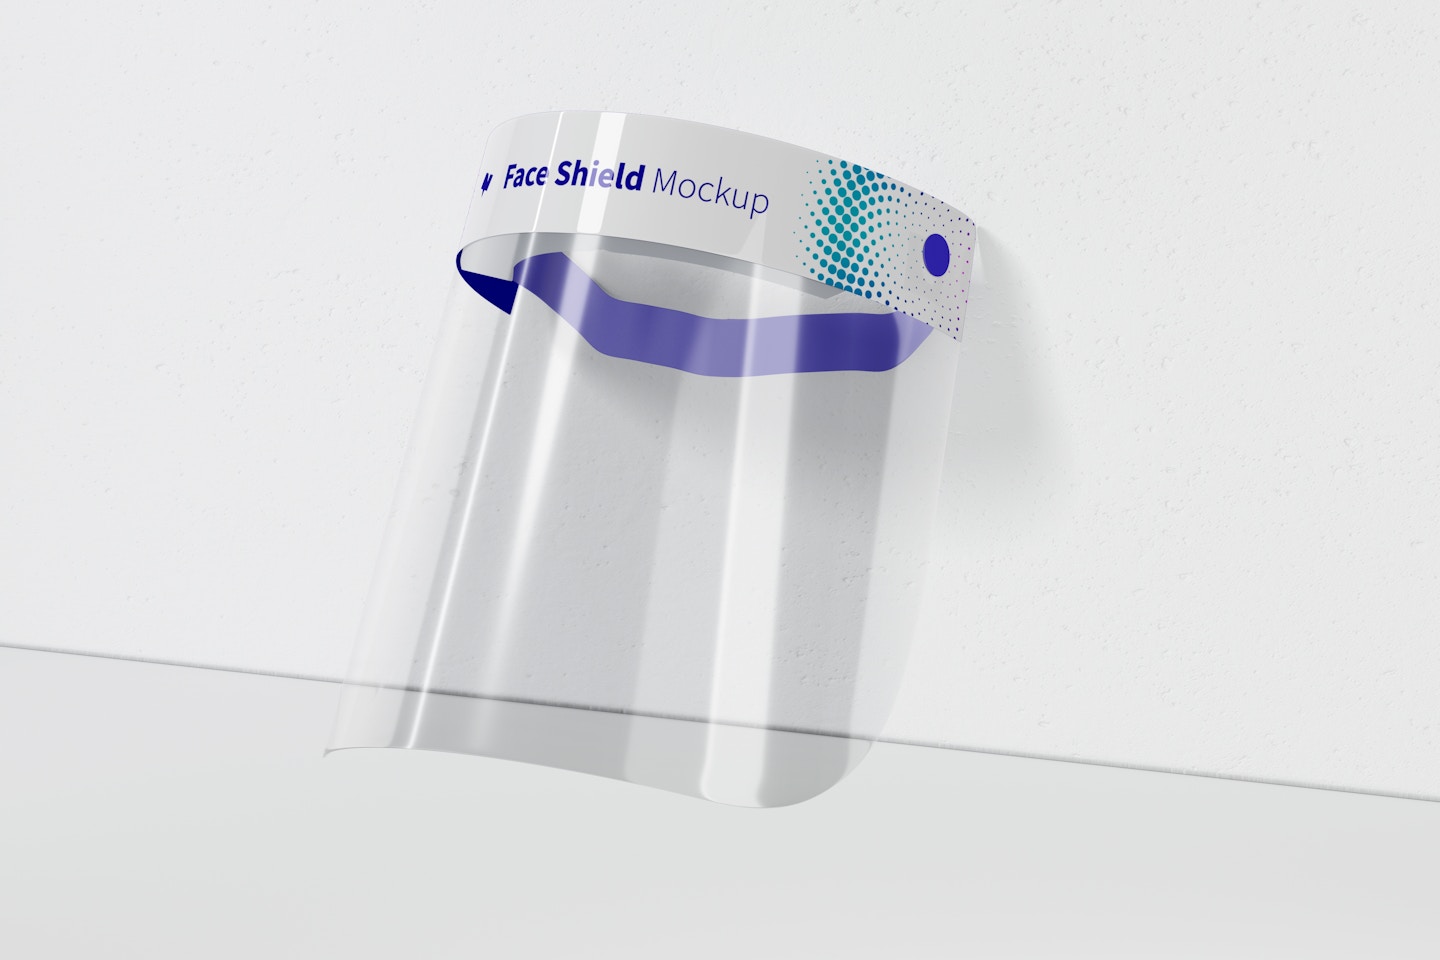 Face Shield Mockup, Perspective View